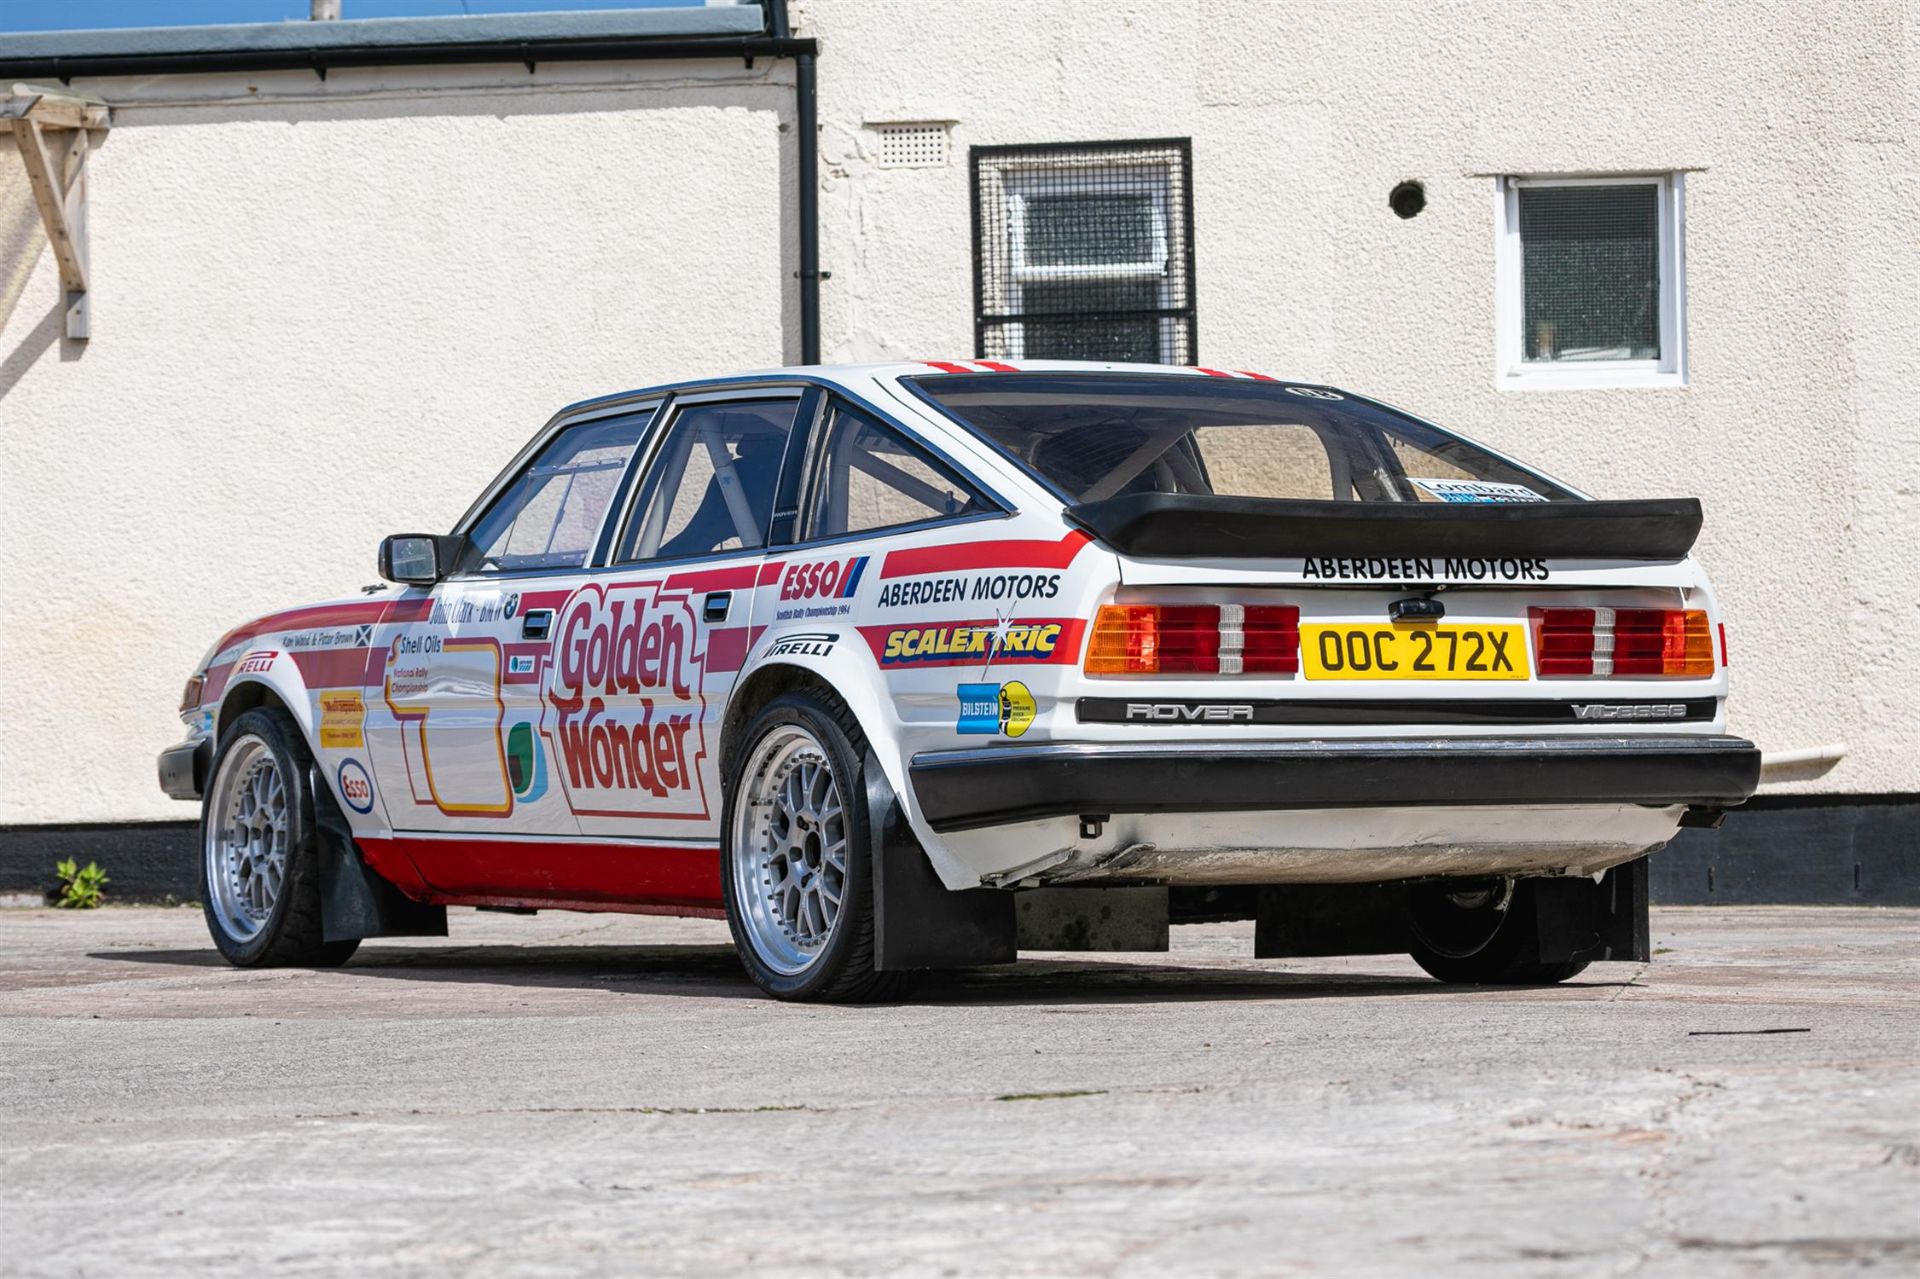 1982 Rover SD1 Vitesse 'Group A' Works Rally Car - Image 4 of 10